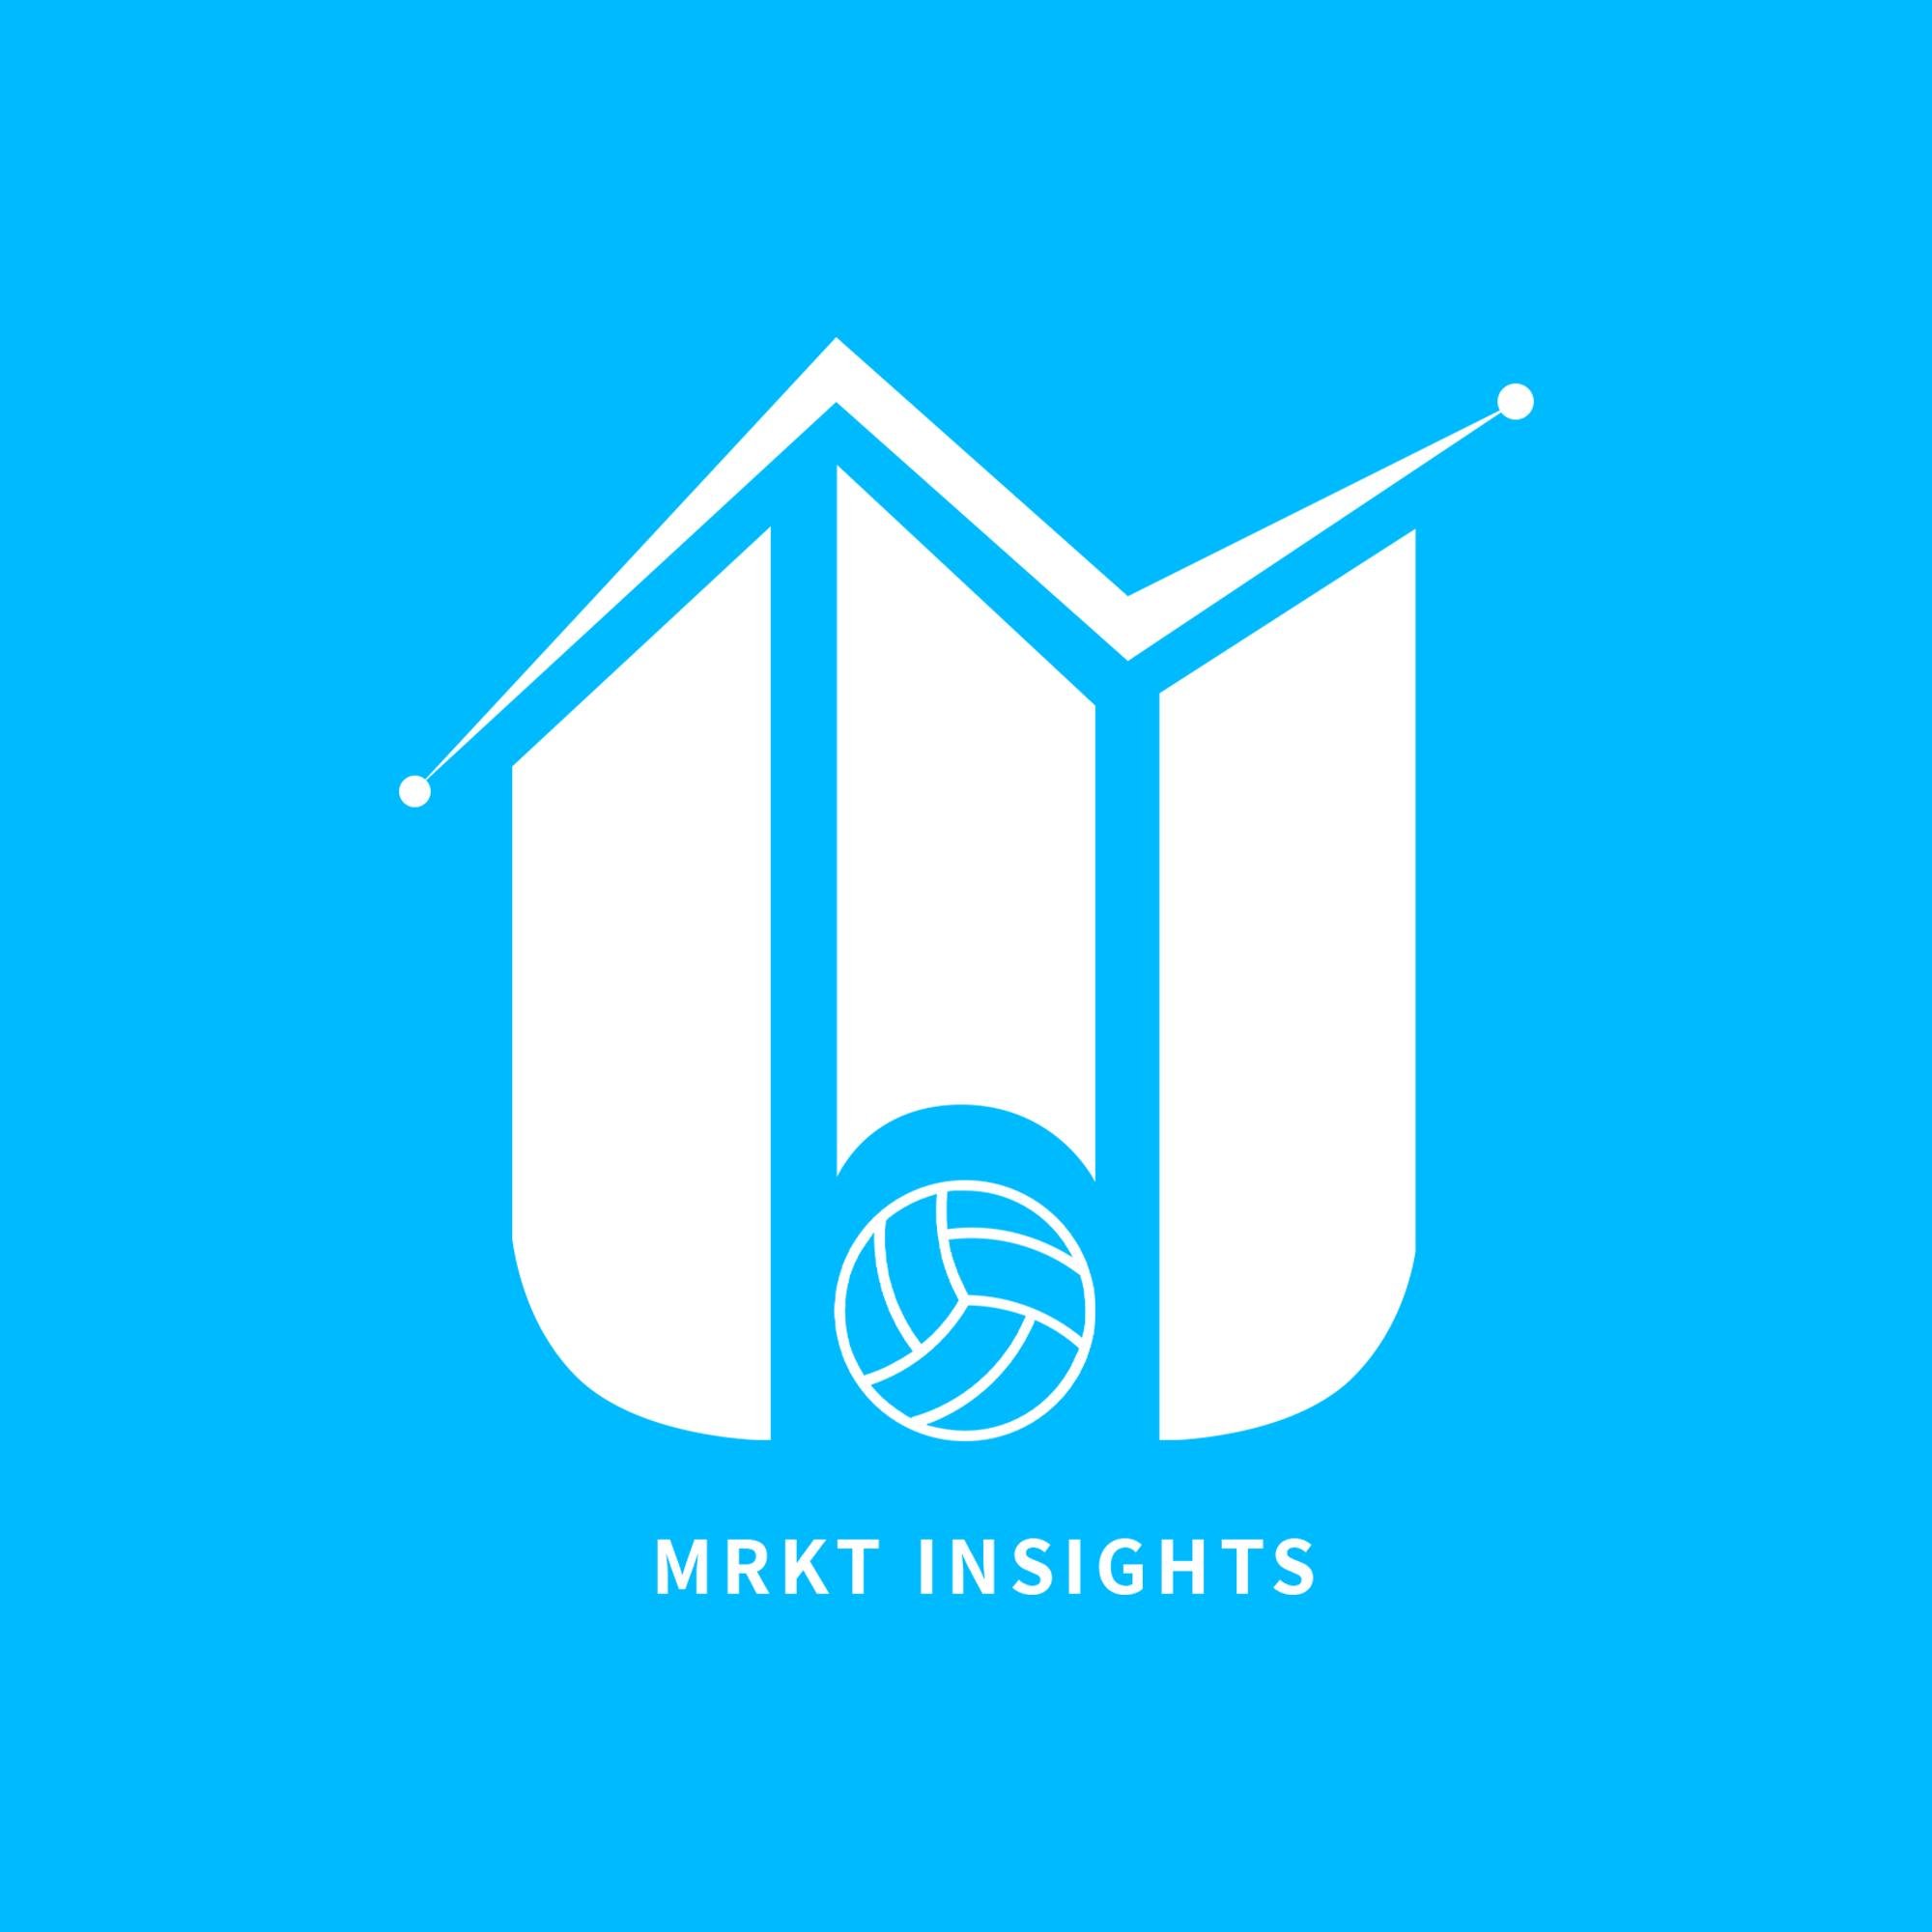 Data-driven insights to aid decision making in football.
Podcast: https://t.co/ZbwGr2l7Dc
Get in touch at: contact@mrktinsights.com